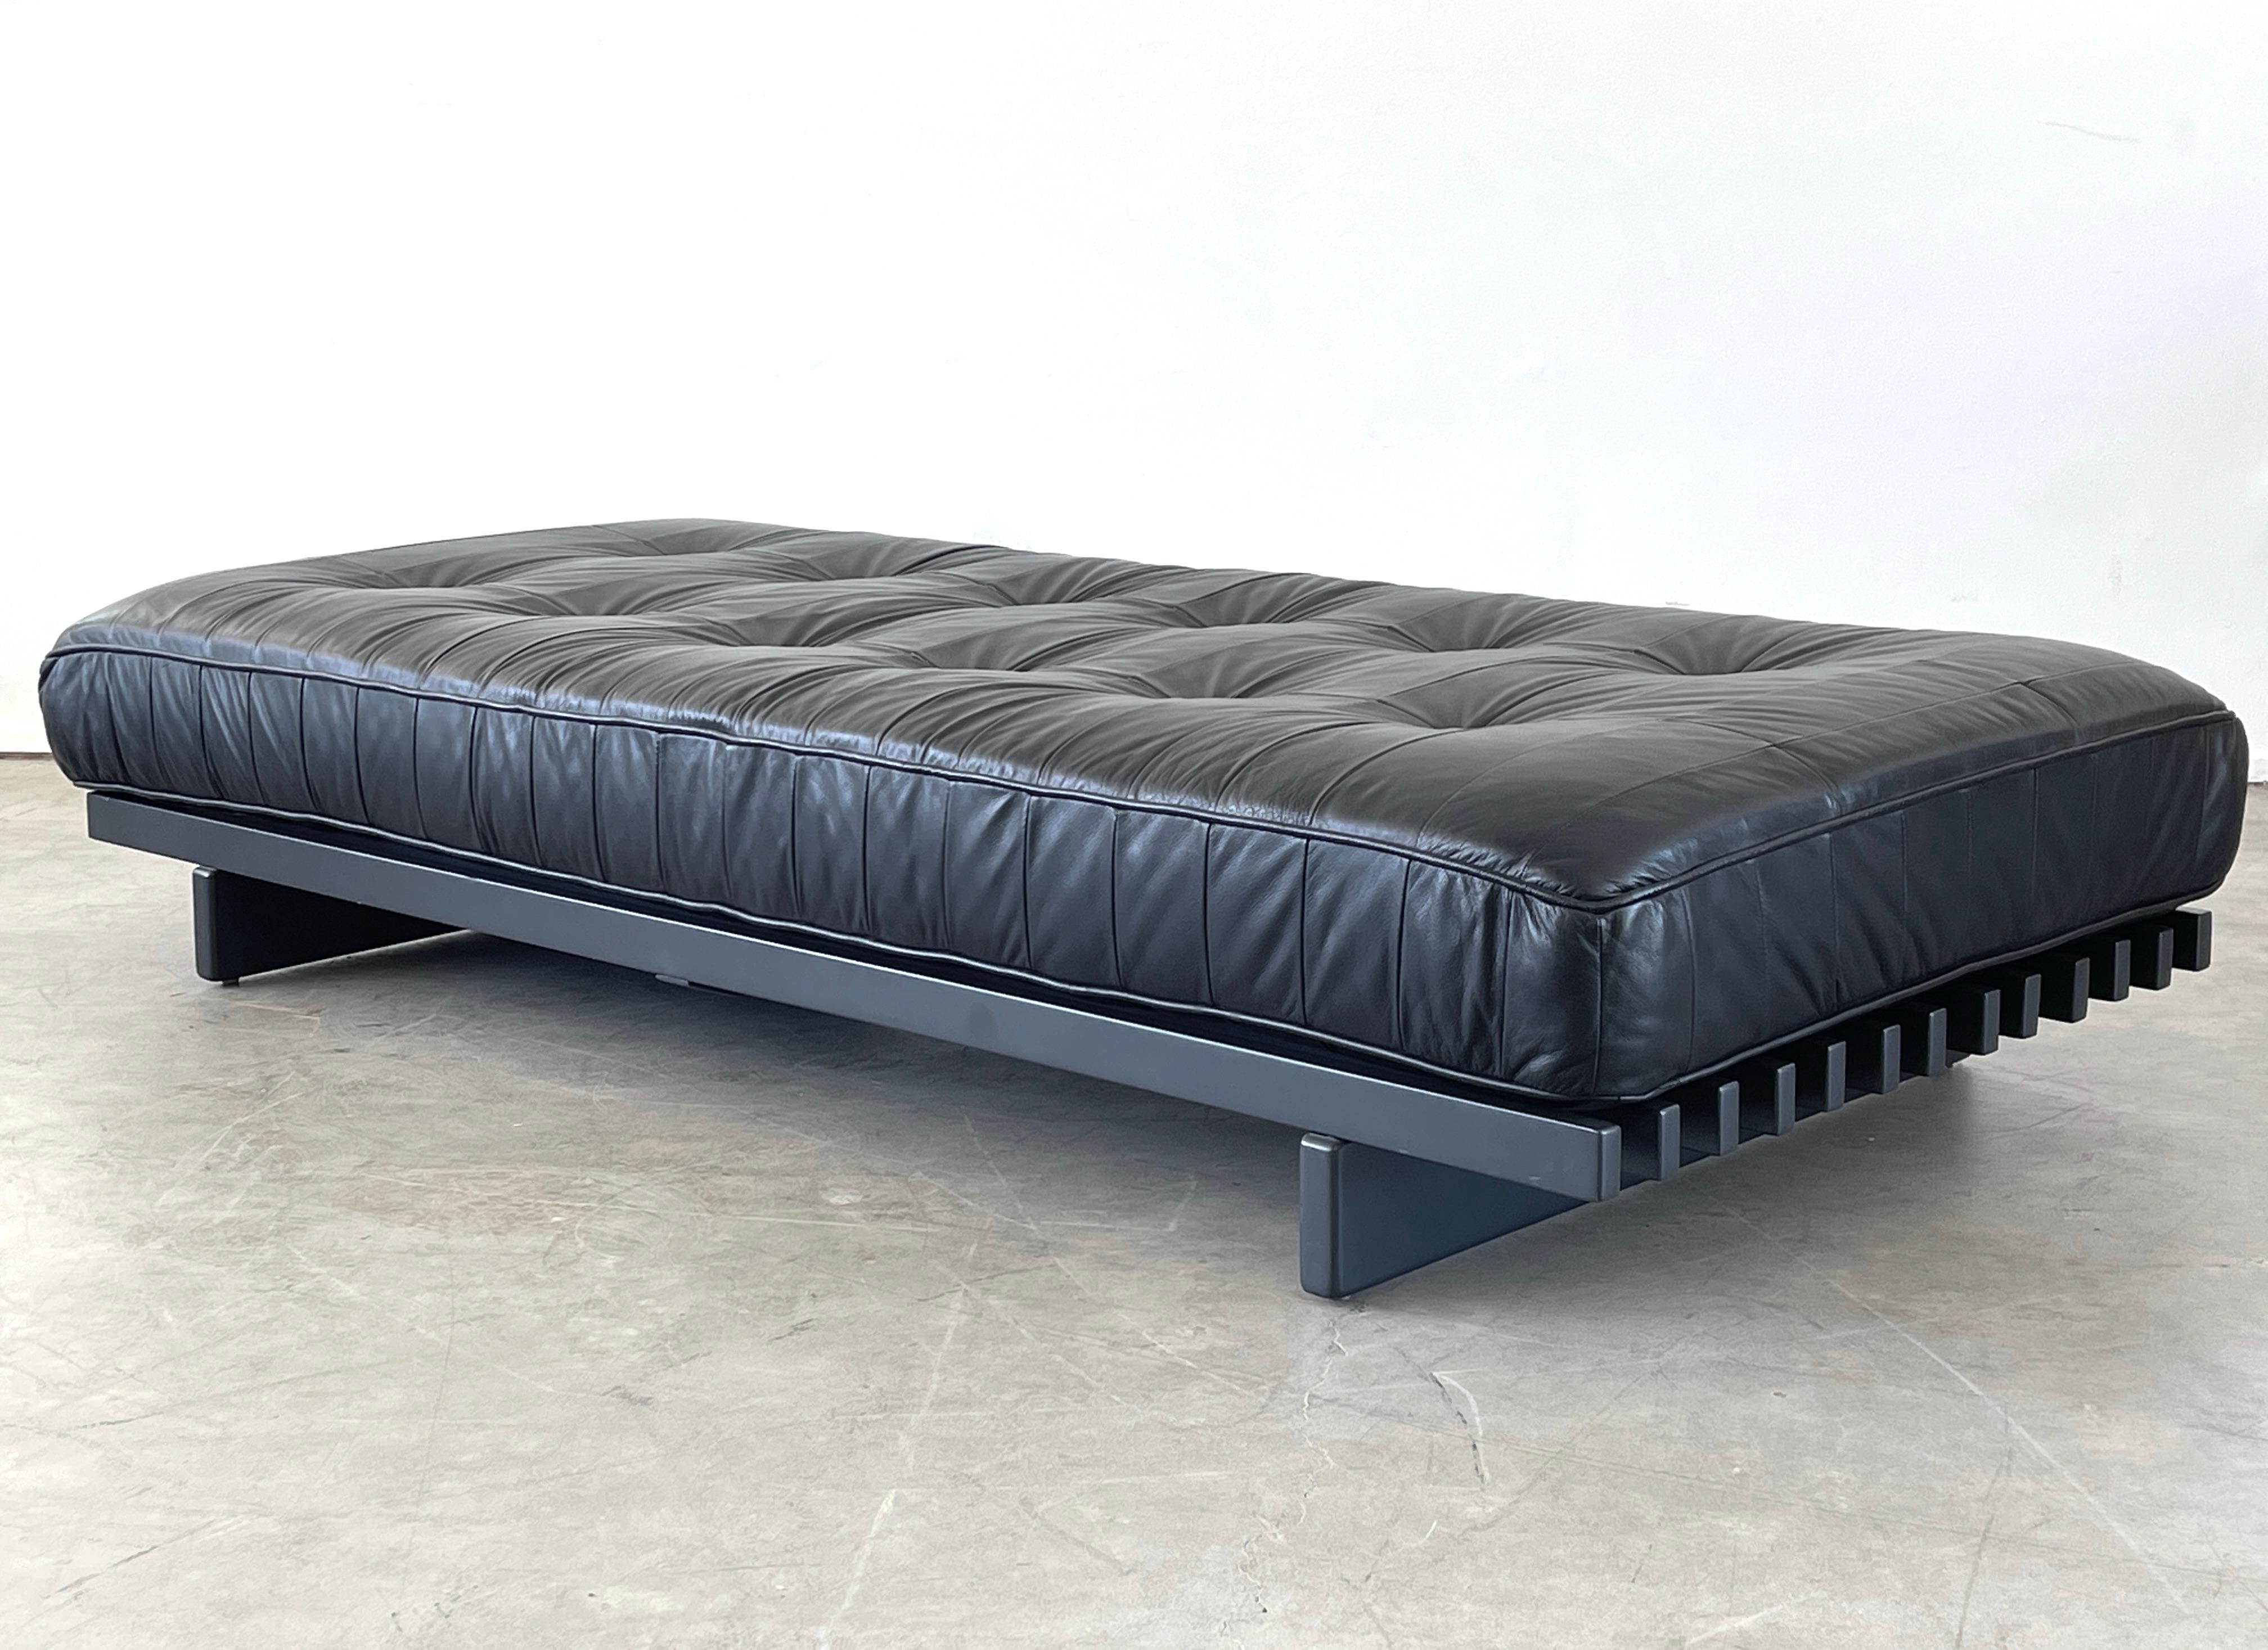 Wonderful De Sede daybed DS 80 in black leather
Signature patchwork leather has wonderful patina and sits on a black slatted wood frame.